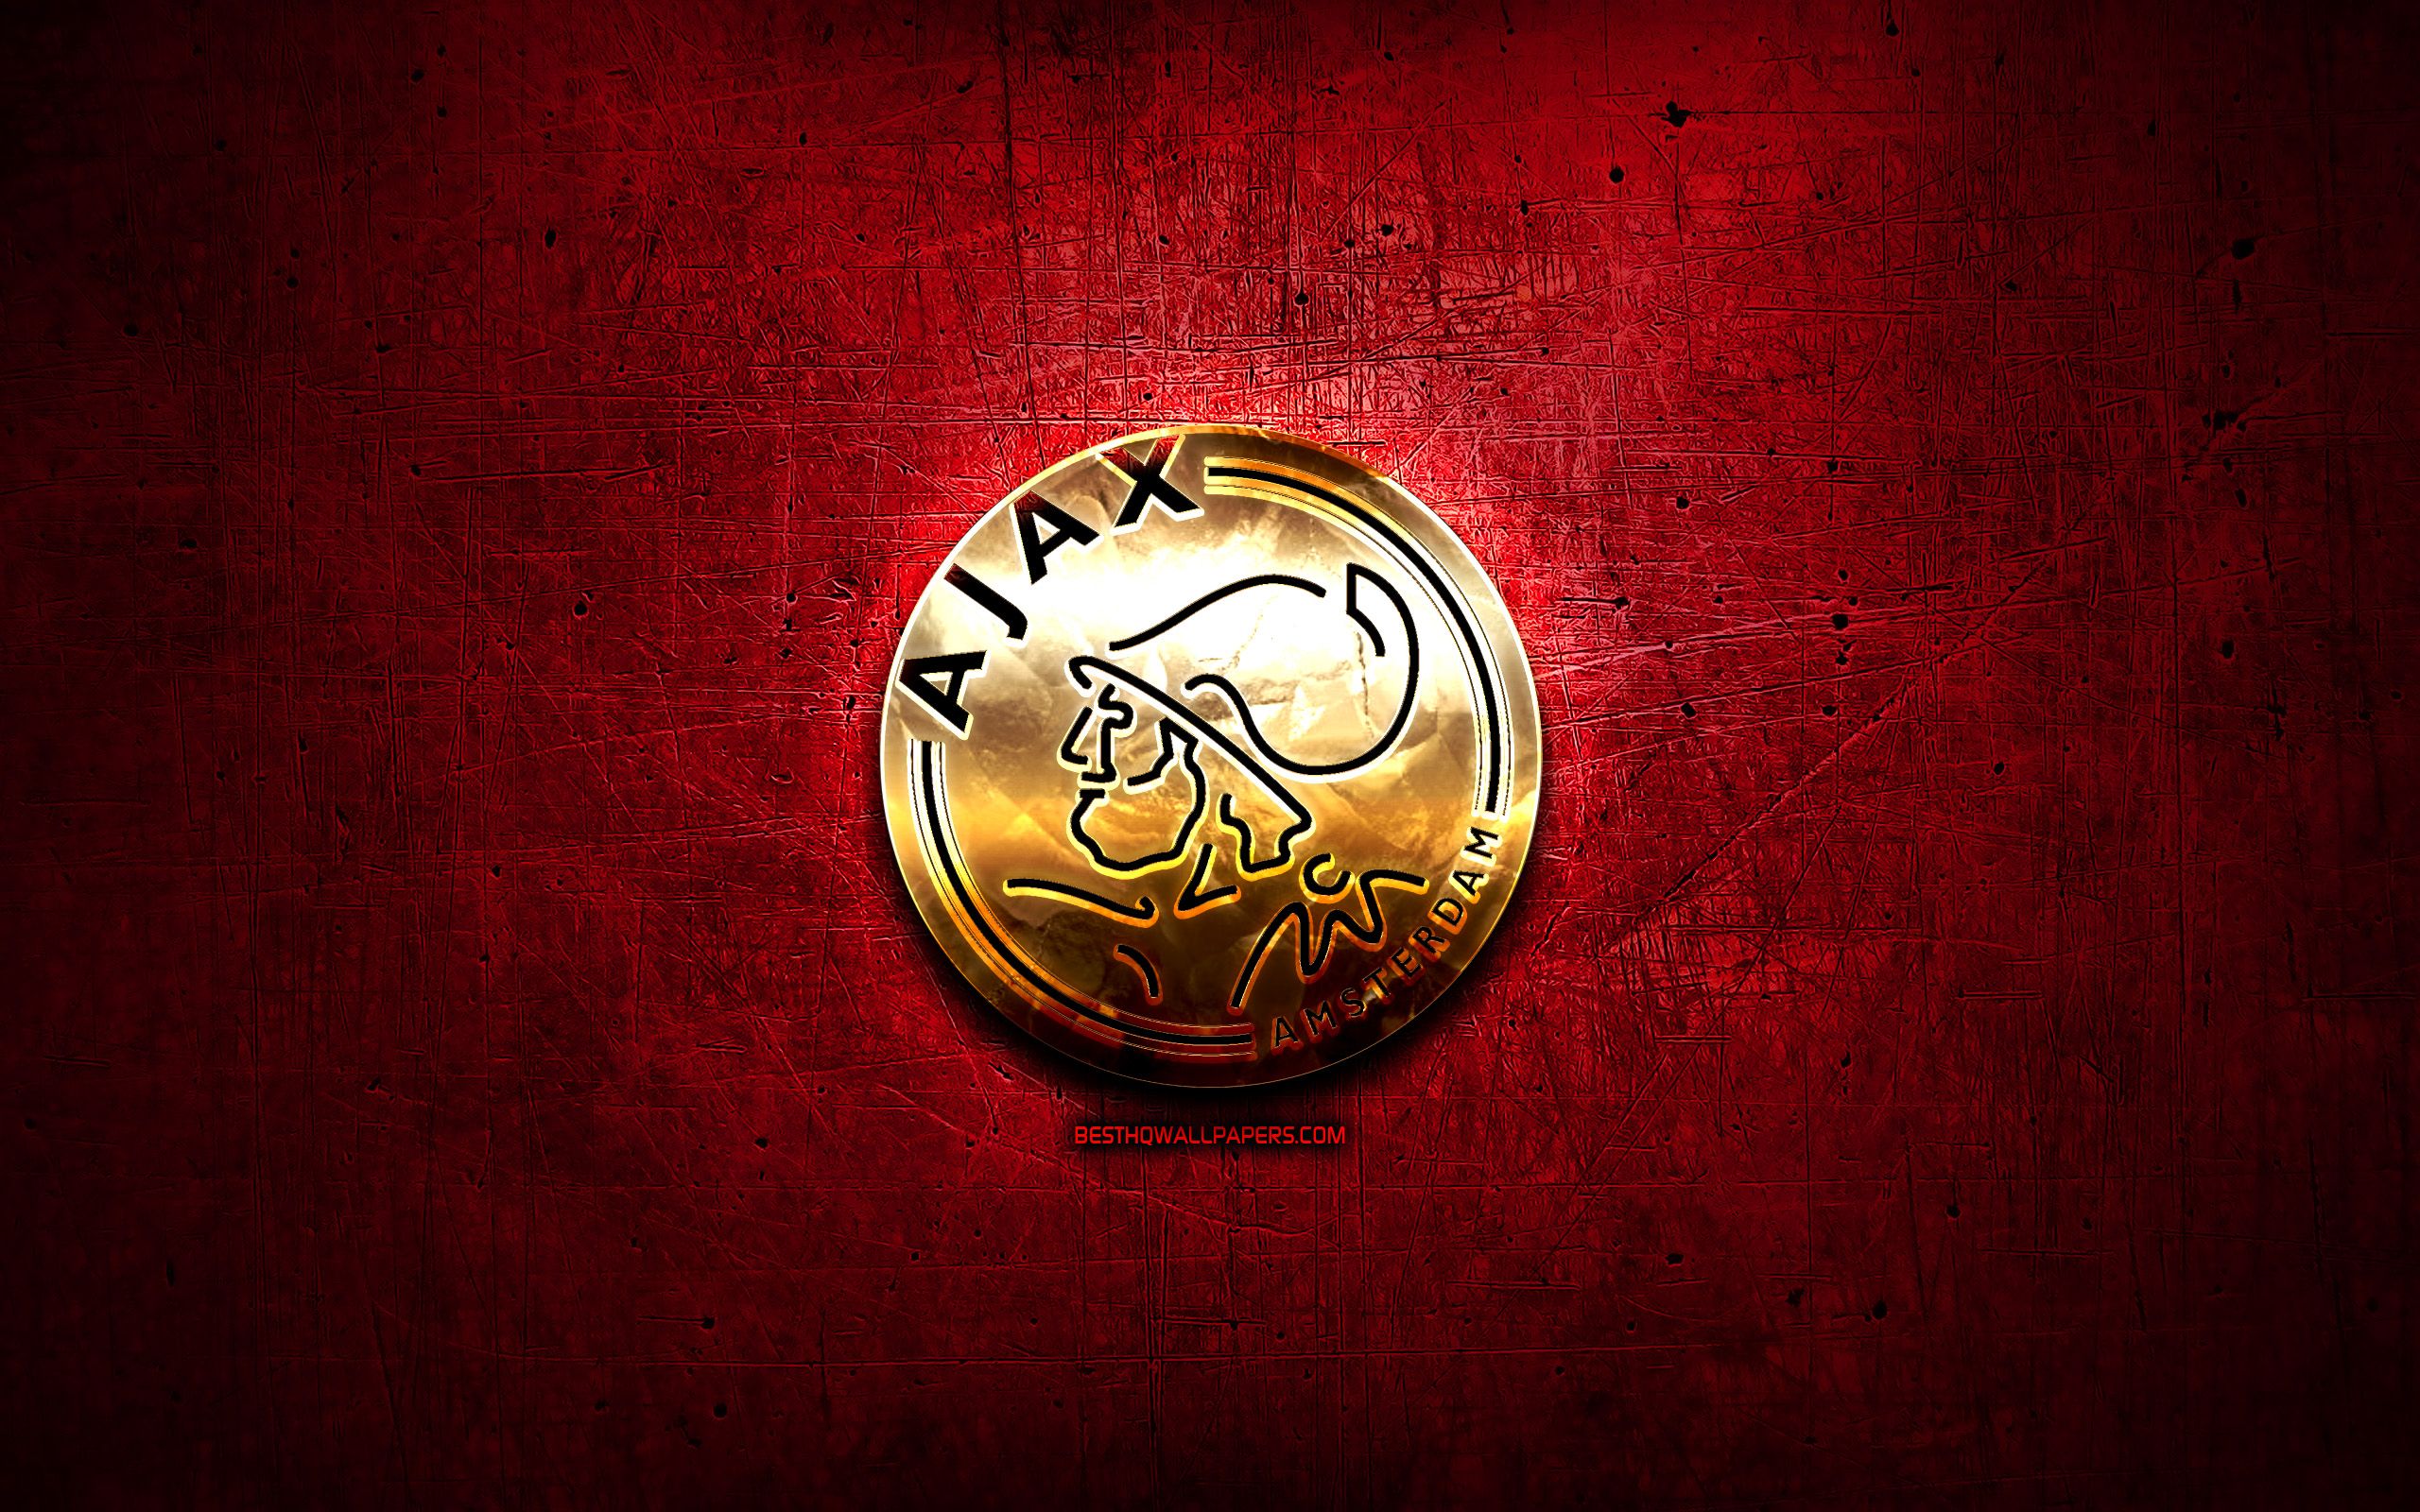 Download wallpaper Ajax FC, golden logo, Eredivisie, red abstract background, soccer, Dutch football club, Ajax logo, football, AFC Ajax, Netherlands for desktop with resolution 2560x1600. High Quality HD picture wallpaper